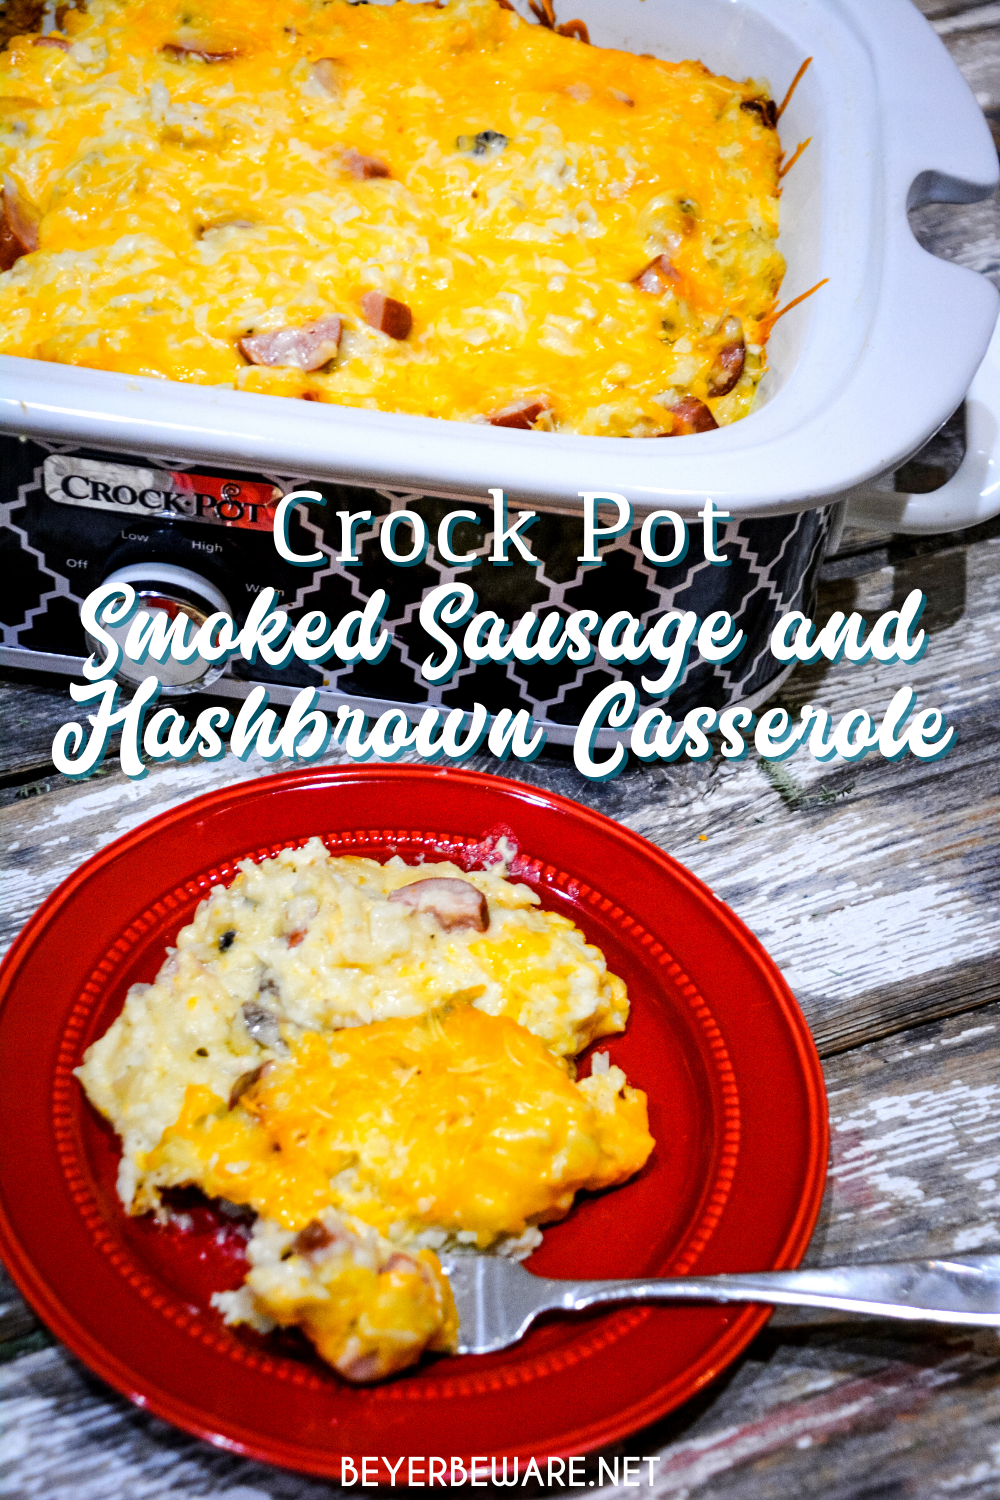 Crockpot smoked sausage and hashbrown casserole is a simple cheesy sausage and potato recipe made with frozen hash browns, sour cream, onions, cream of mushroom soup, smoked sausage, and shredded cheese that is a great weeknight meal in my beloved casserole crock pot.